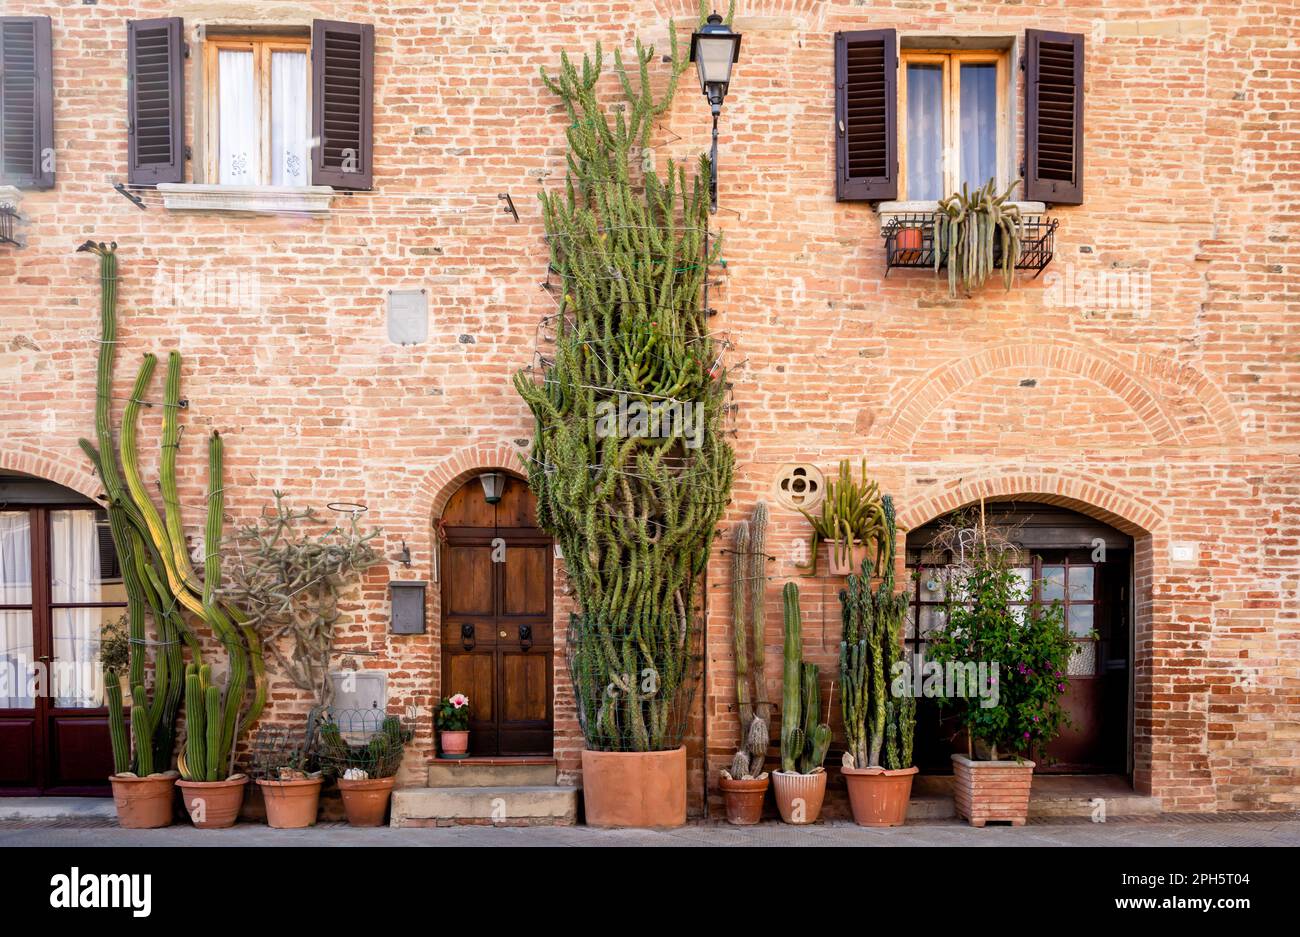 Gambassi Terme medieval town: characteristic historic building with succulent plants - Gambassi Terme, Firenze province, Tuscany, Italy - june 1, 2021 Stock Photo